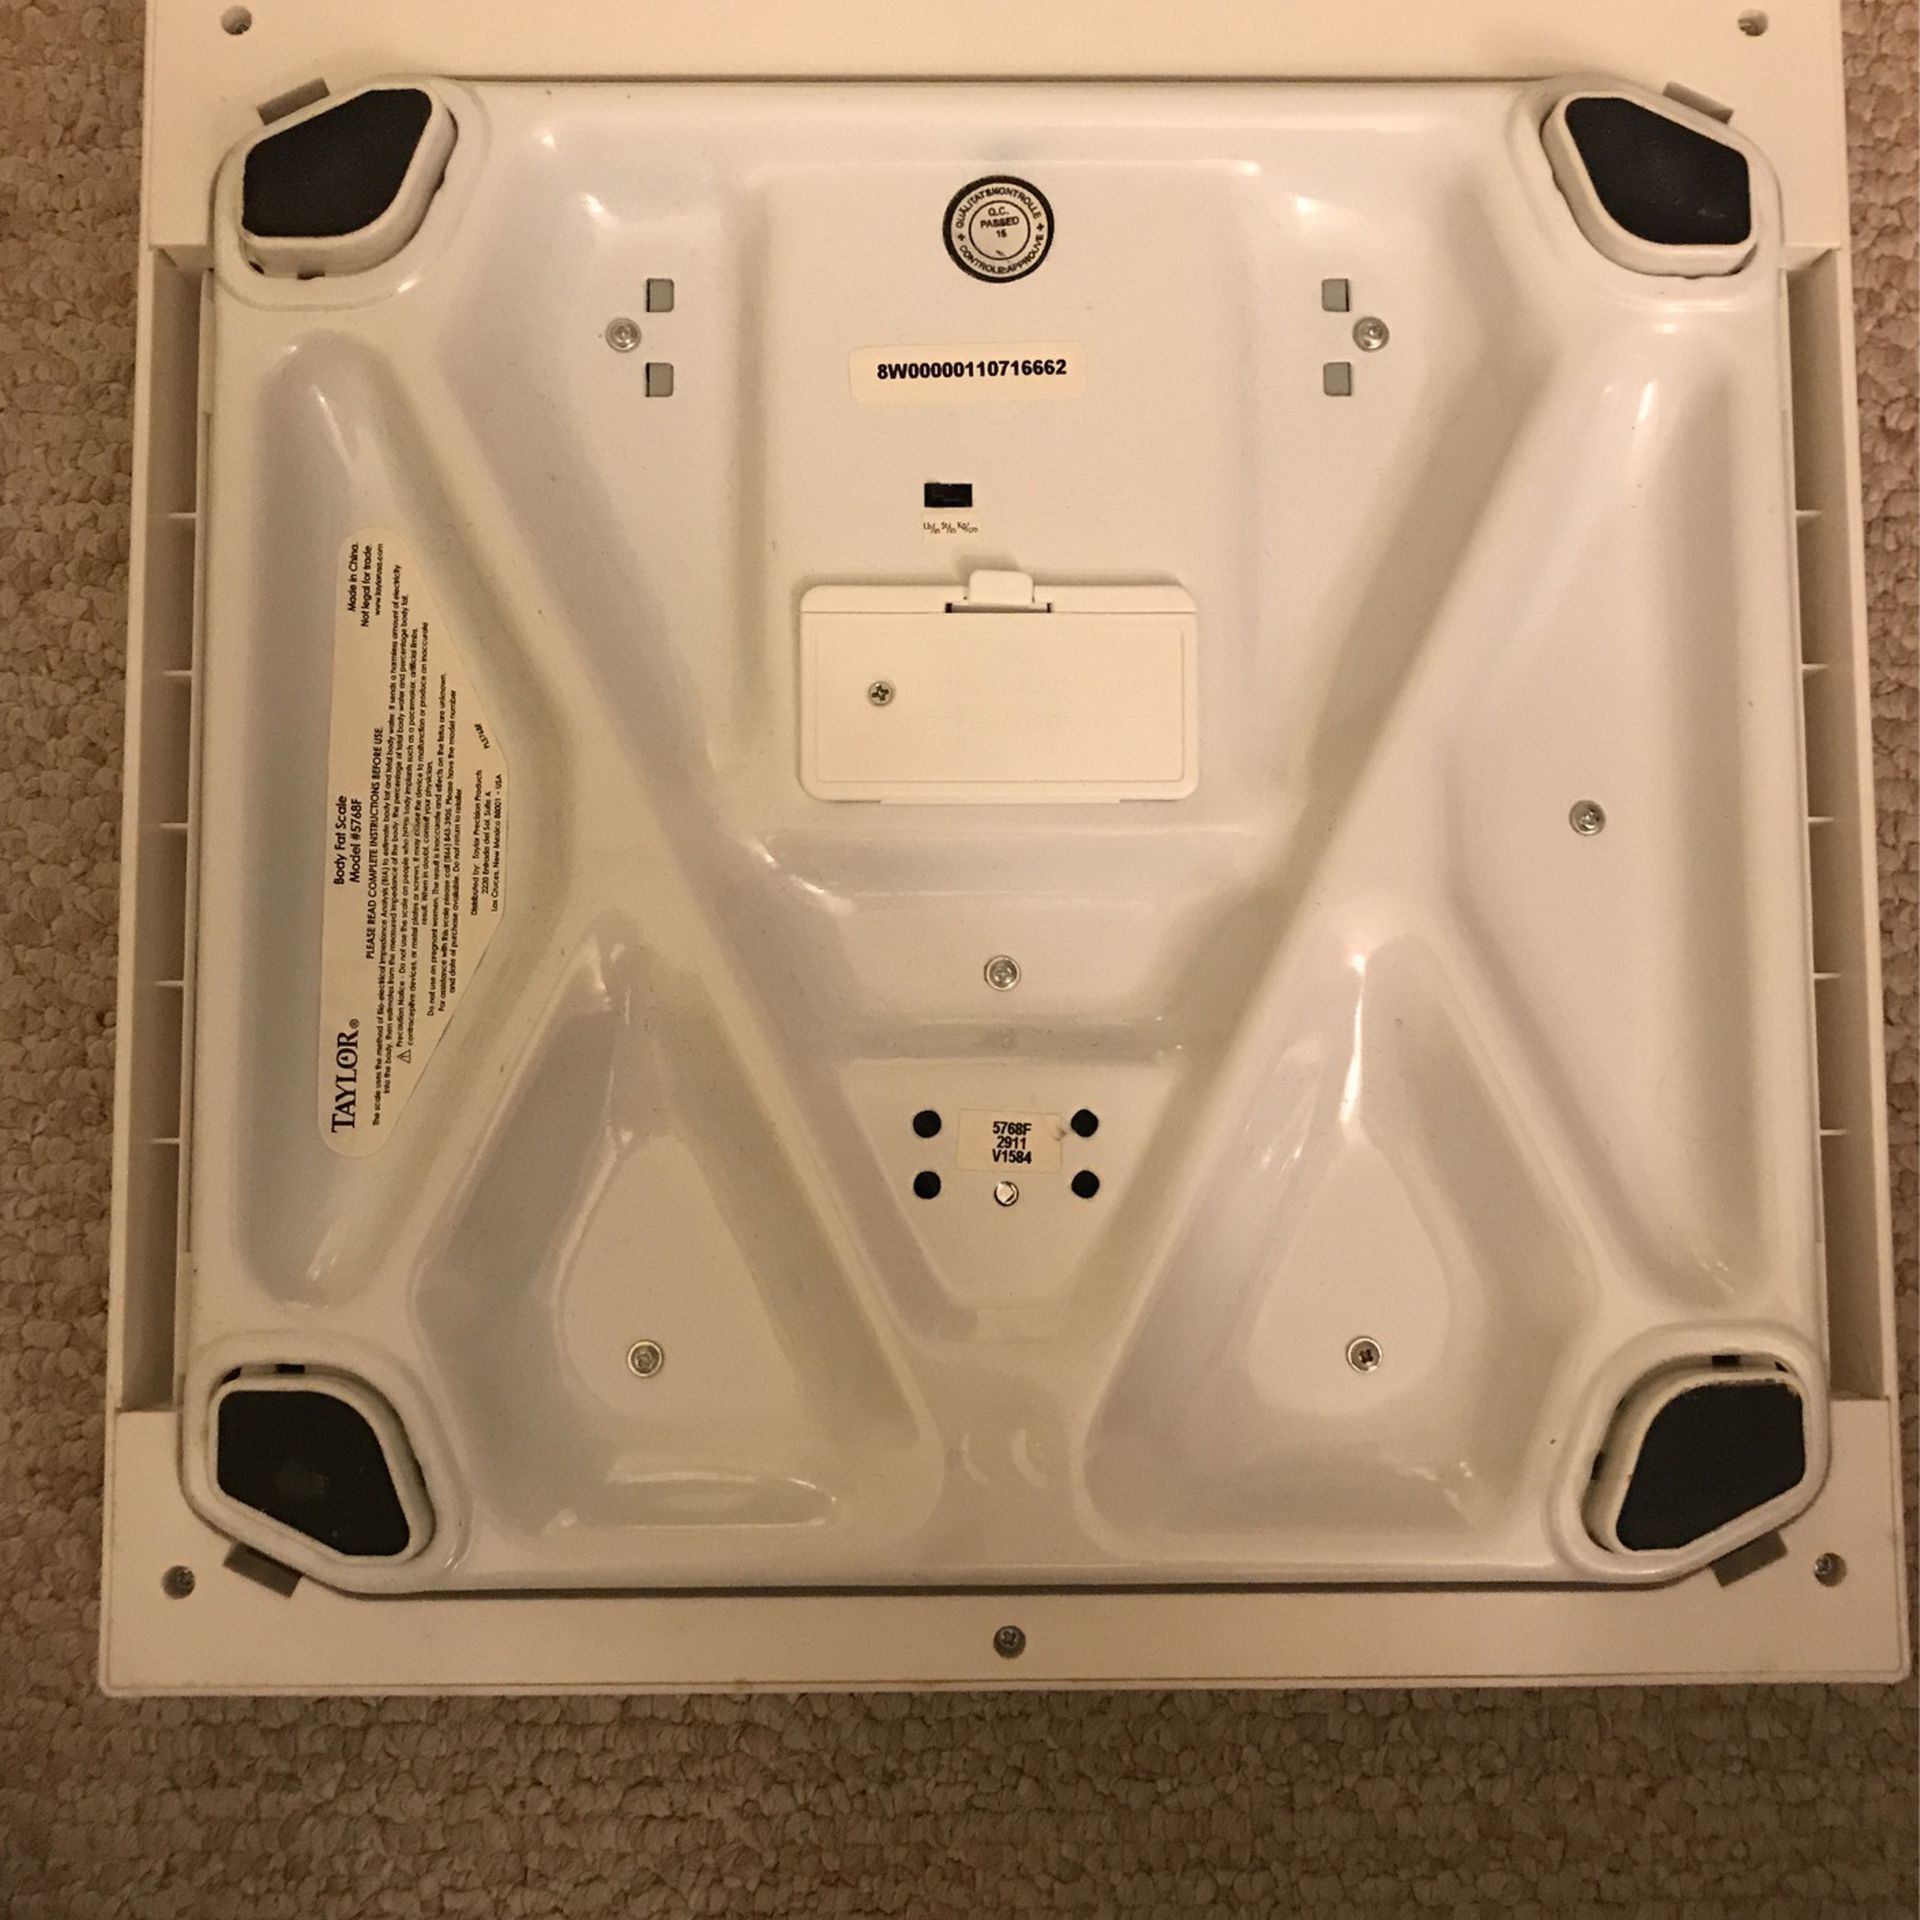 Taylor Body Fat Scale model #5768f for Sale in Alameda, CA - OfferUp